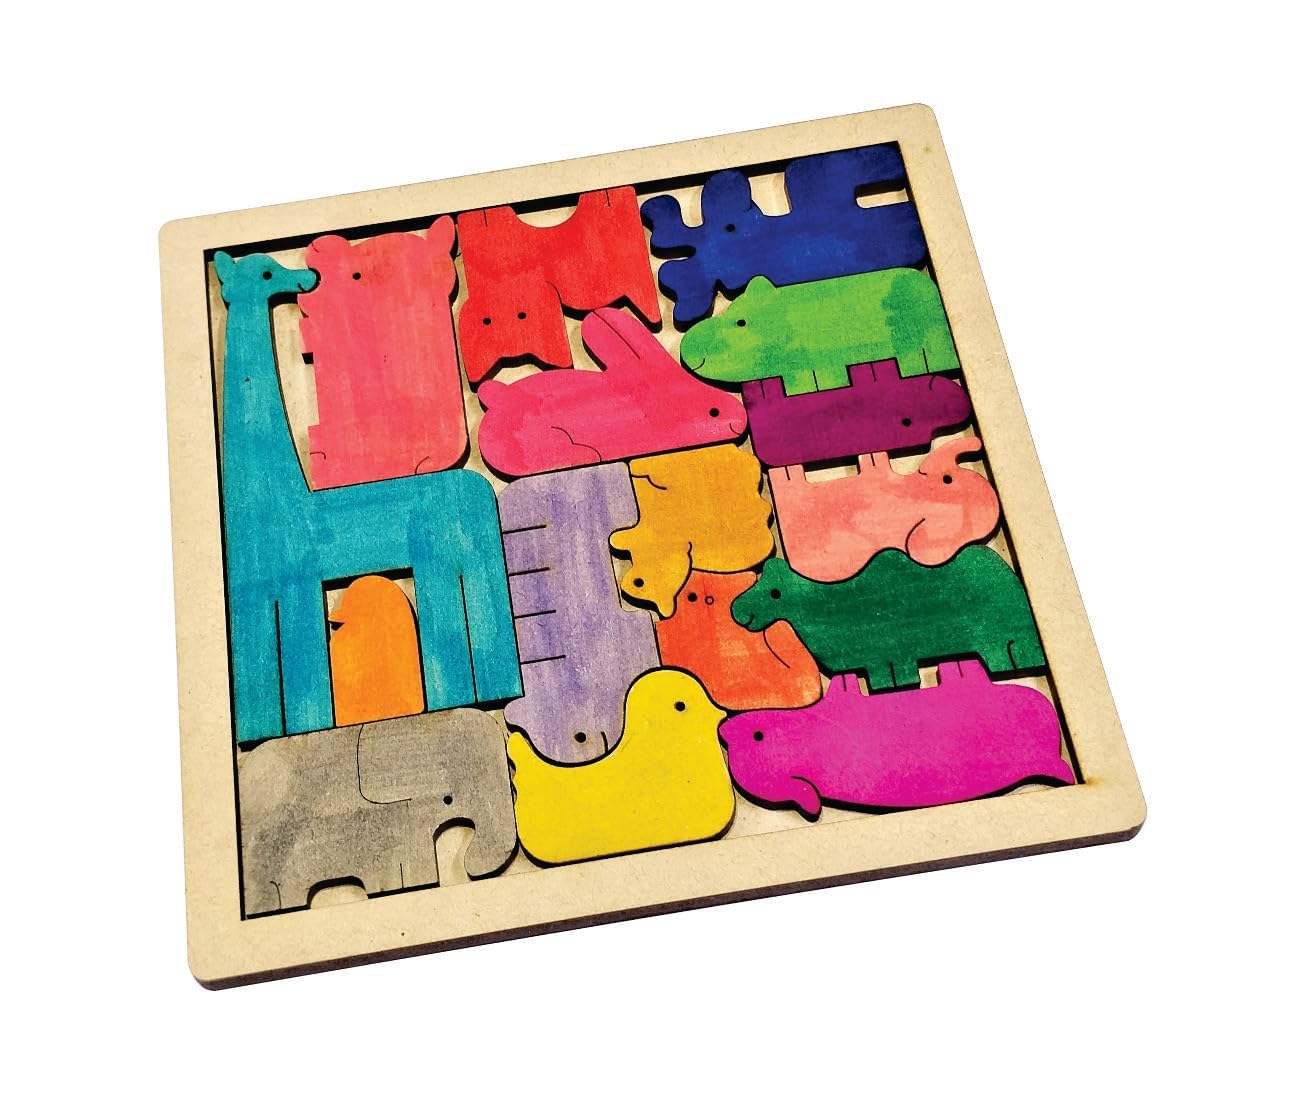 Braintastic Wooden Jigsaw Puzzle Travel Board Game Learning & Creative Educational Intelligence Brain Games Sorting Puzzle Toys for Kids (Animal Puzzle 16)